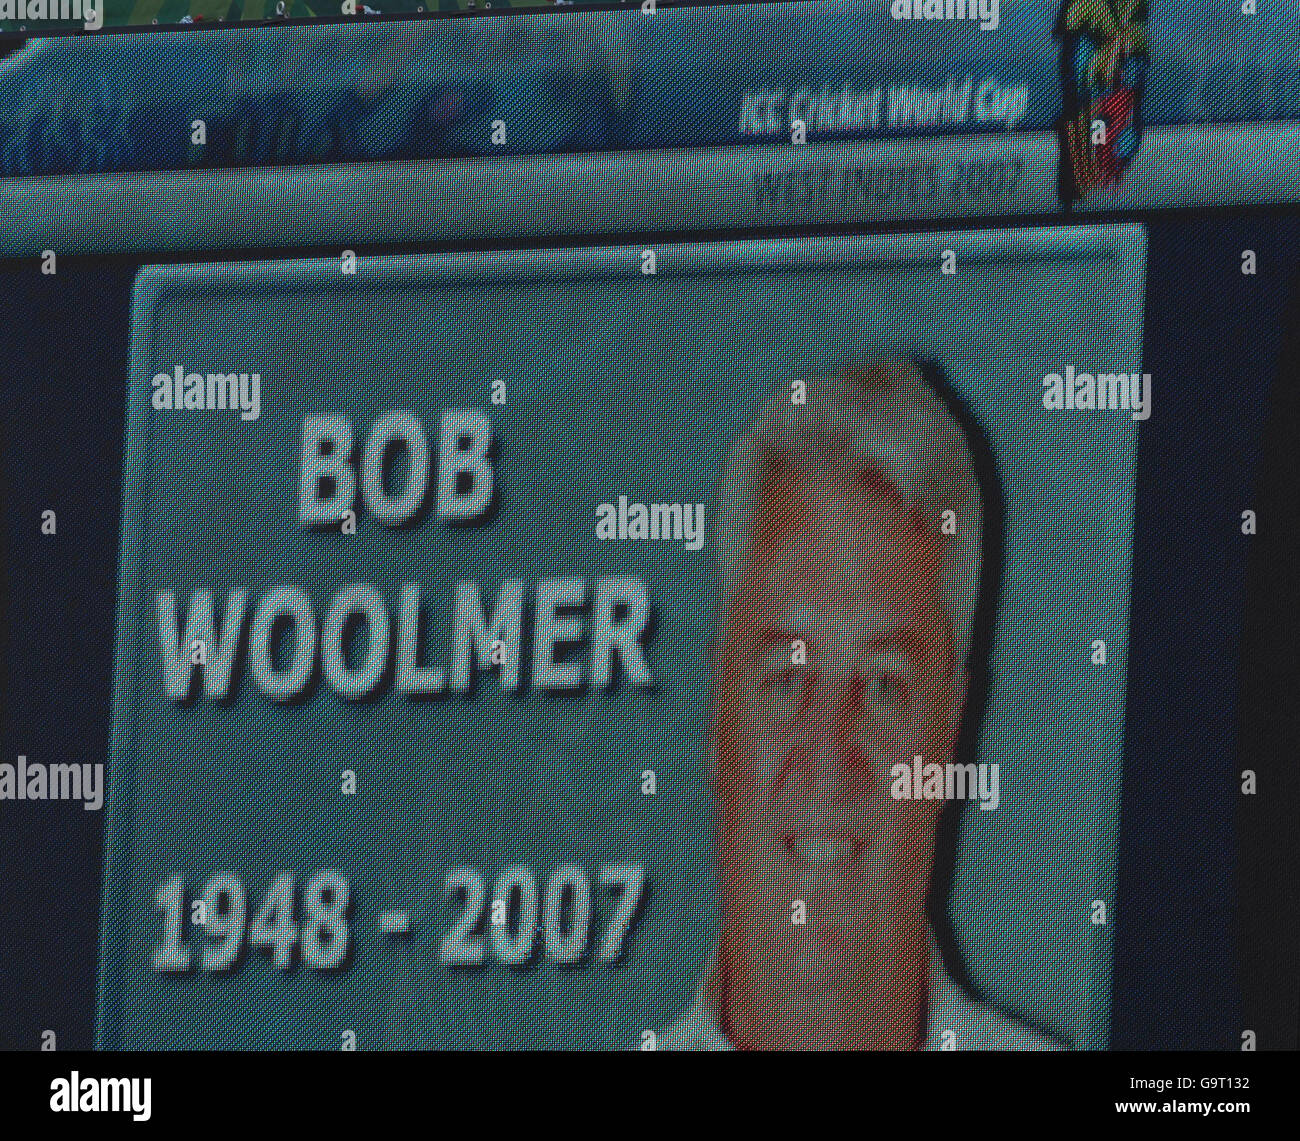 The scoreboard showing a tribute Bob Woolmer during the ICC Cricket World Cup 2007 match at the Beausejour Stadium, Gros Islet, St Lucia. Stock Photo